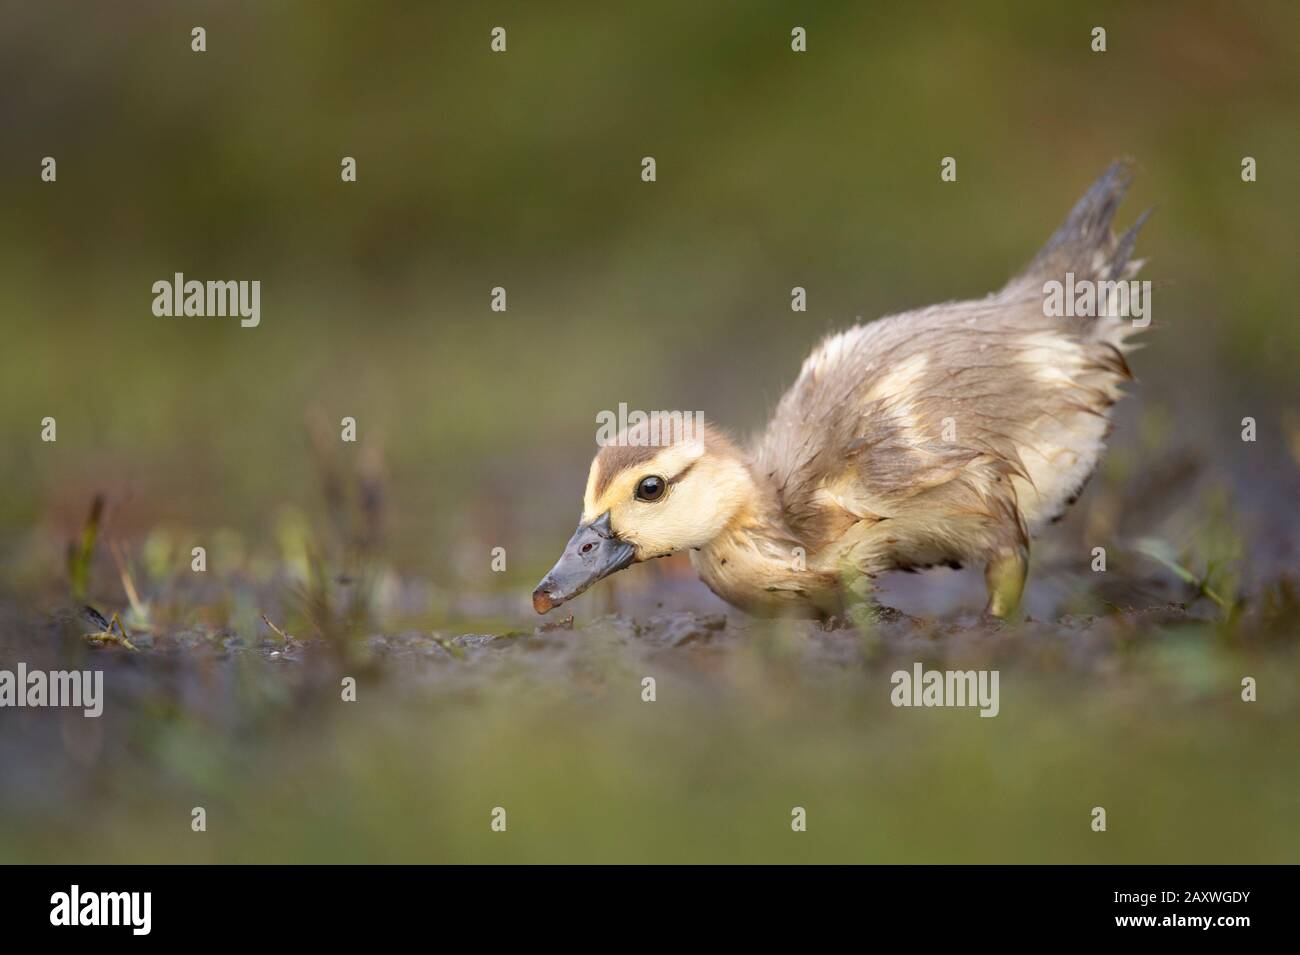 A Muscovy Duckling searches for food in the mud with green grass in front and behind it in soft overcast light. Stock Photo